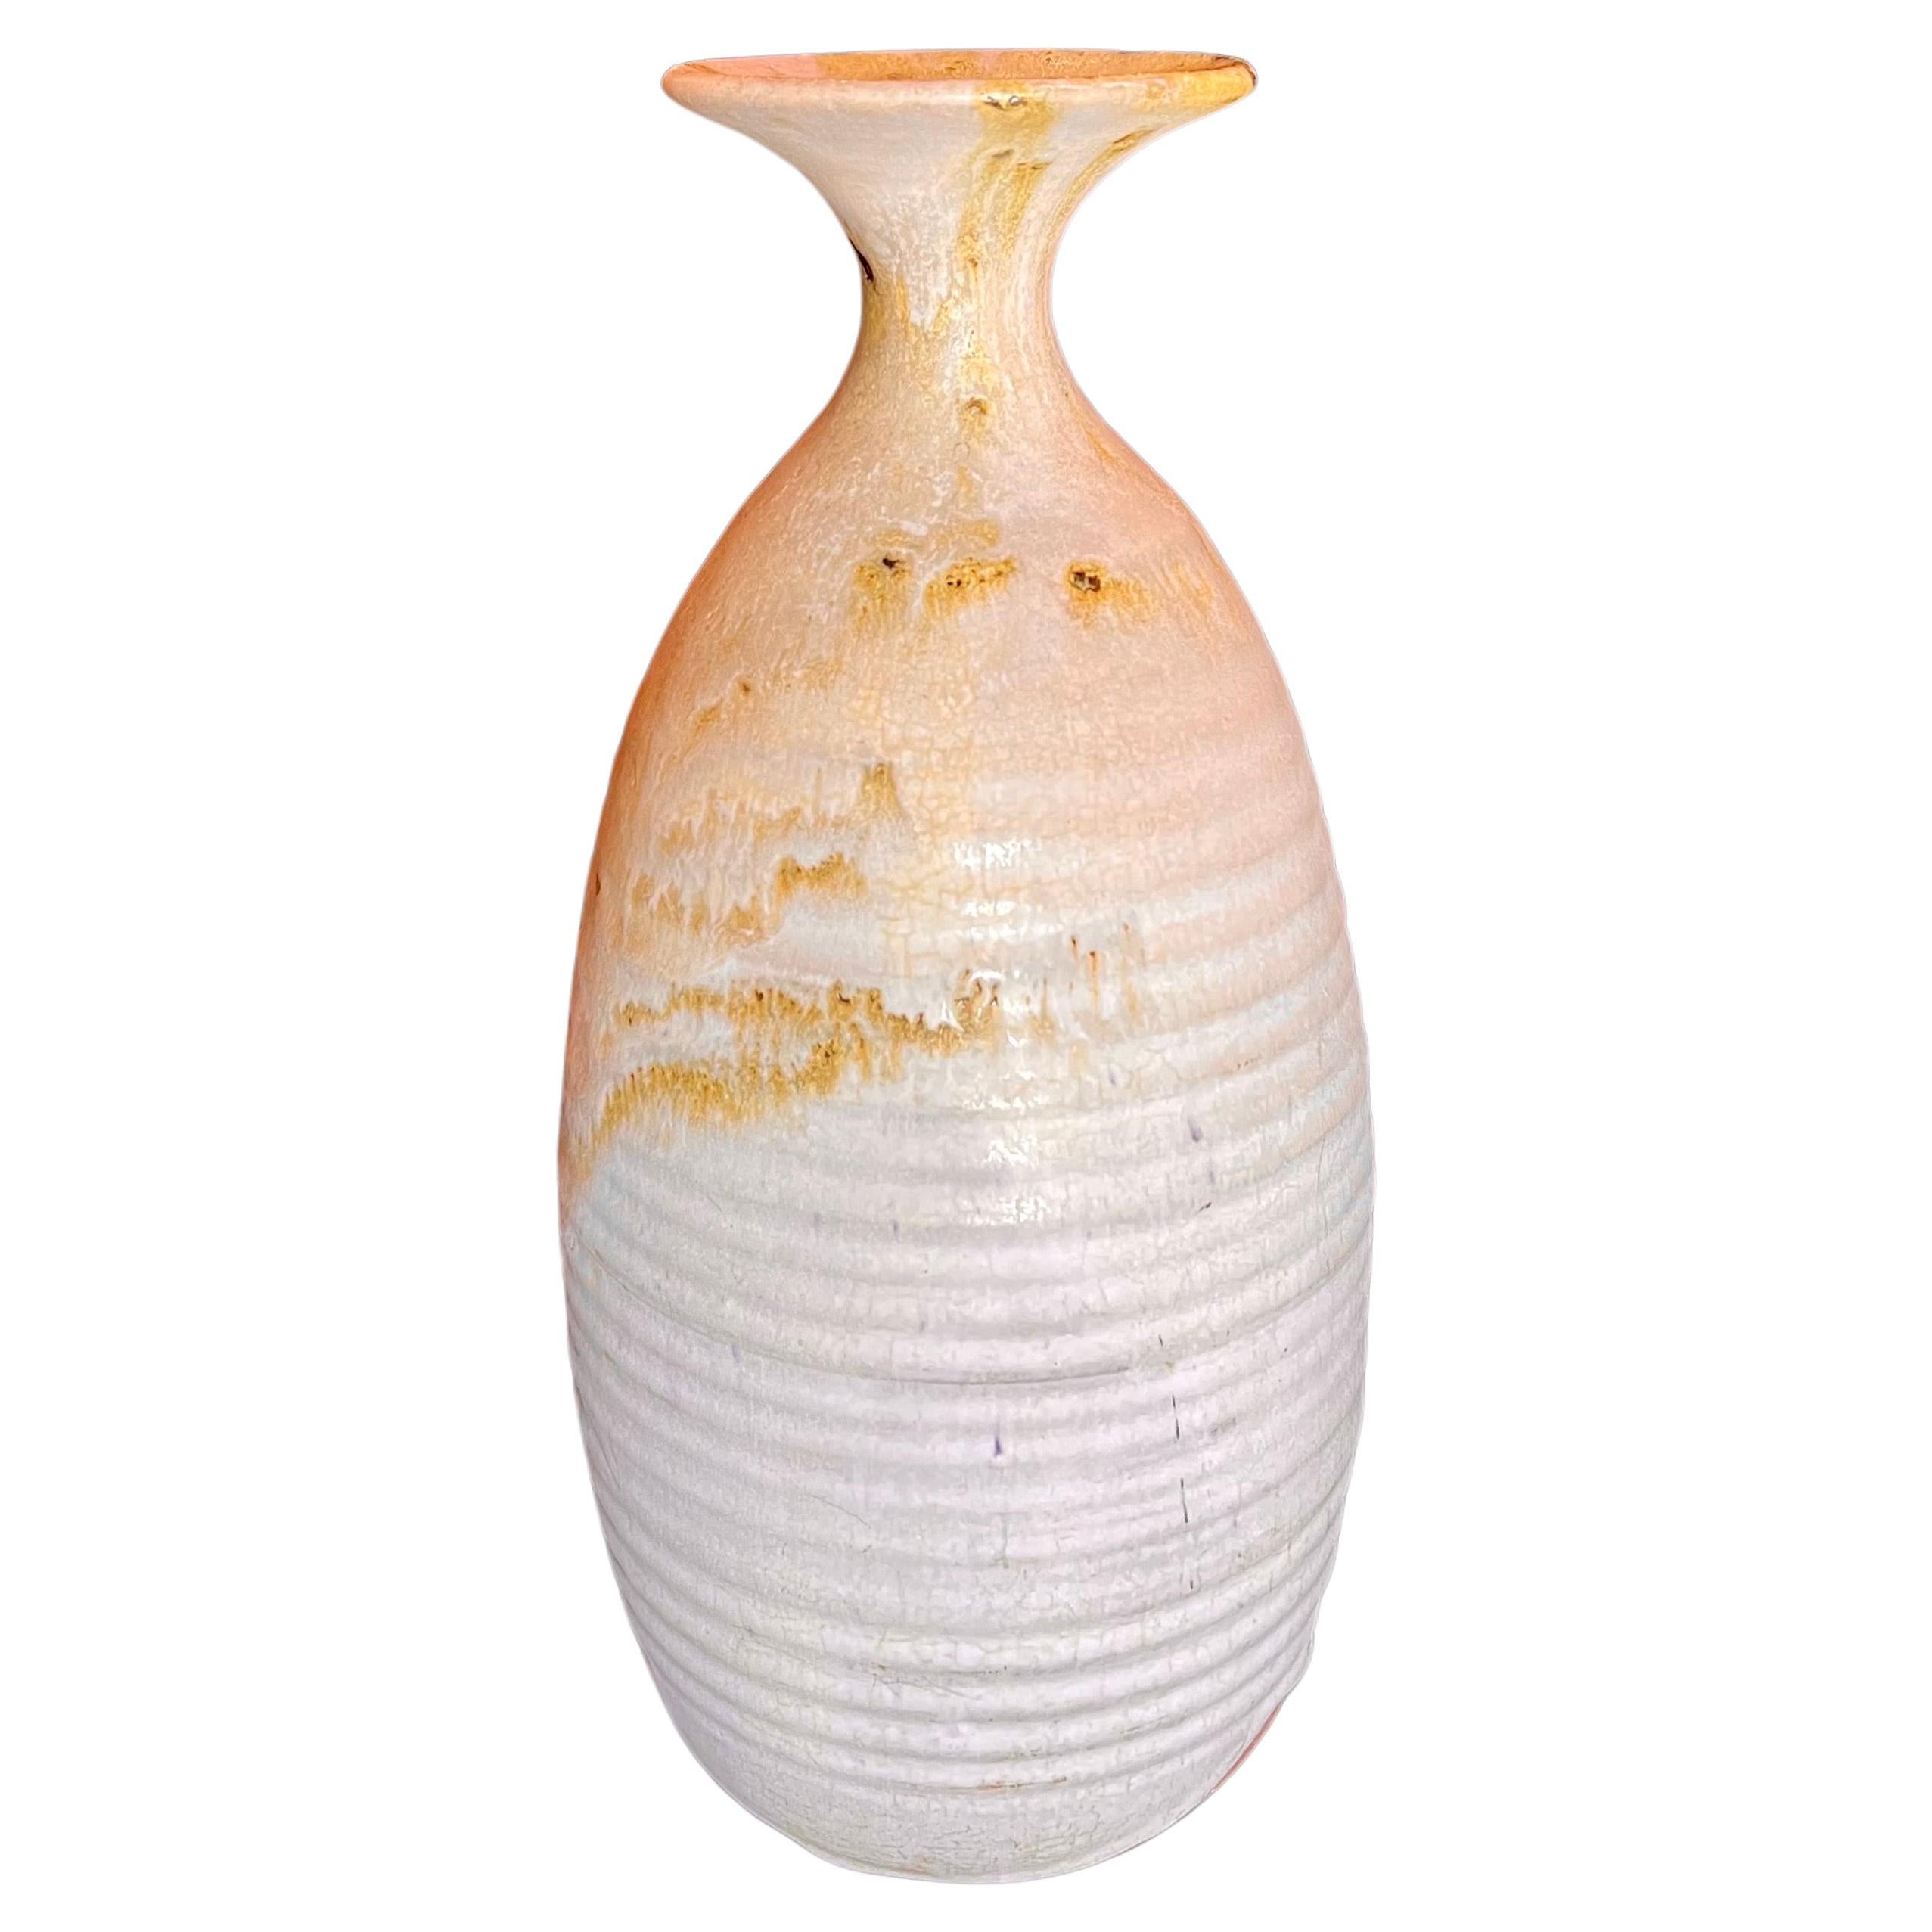 Beautiful rare California pottery tall vase well-done piece, beautiful glaze stamped at the bottom.